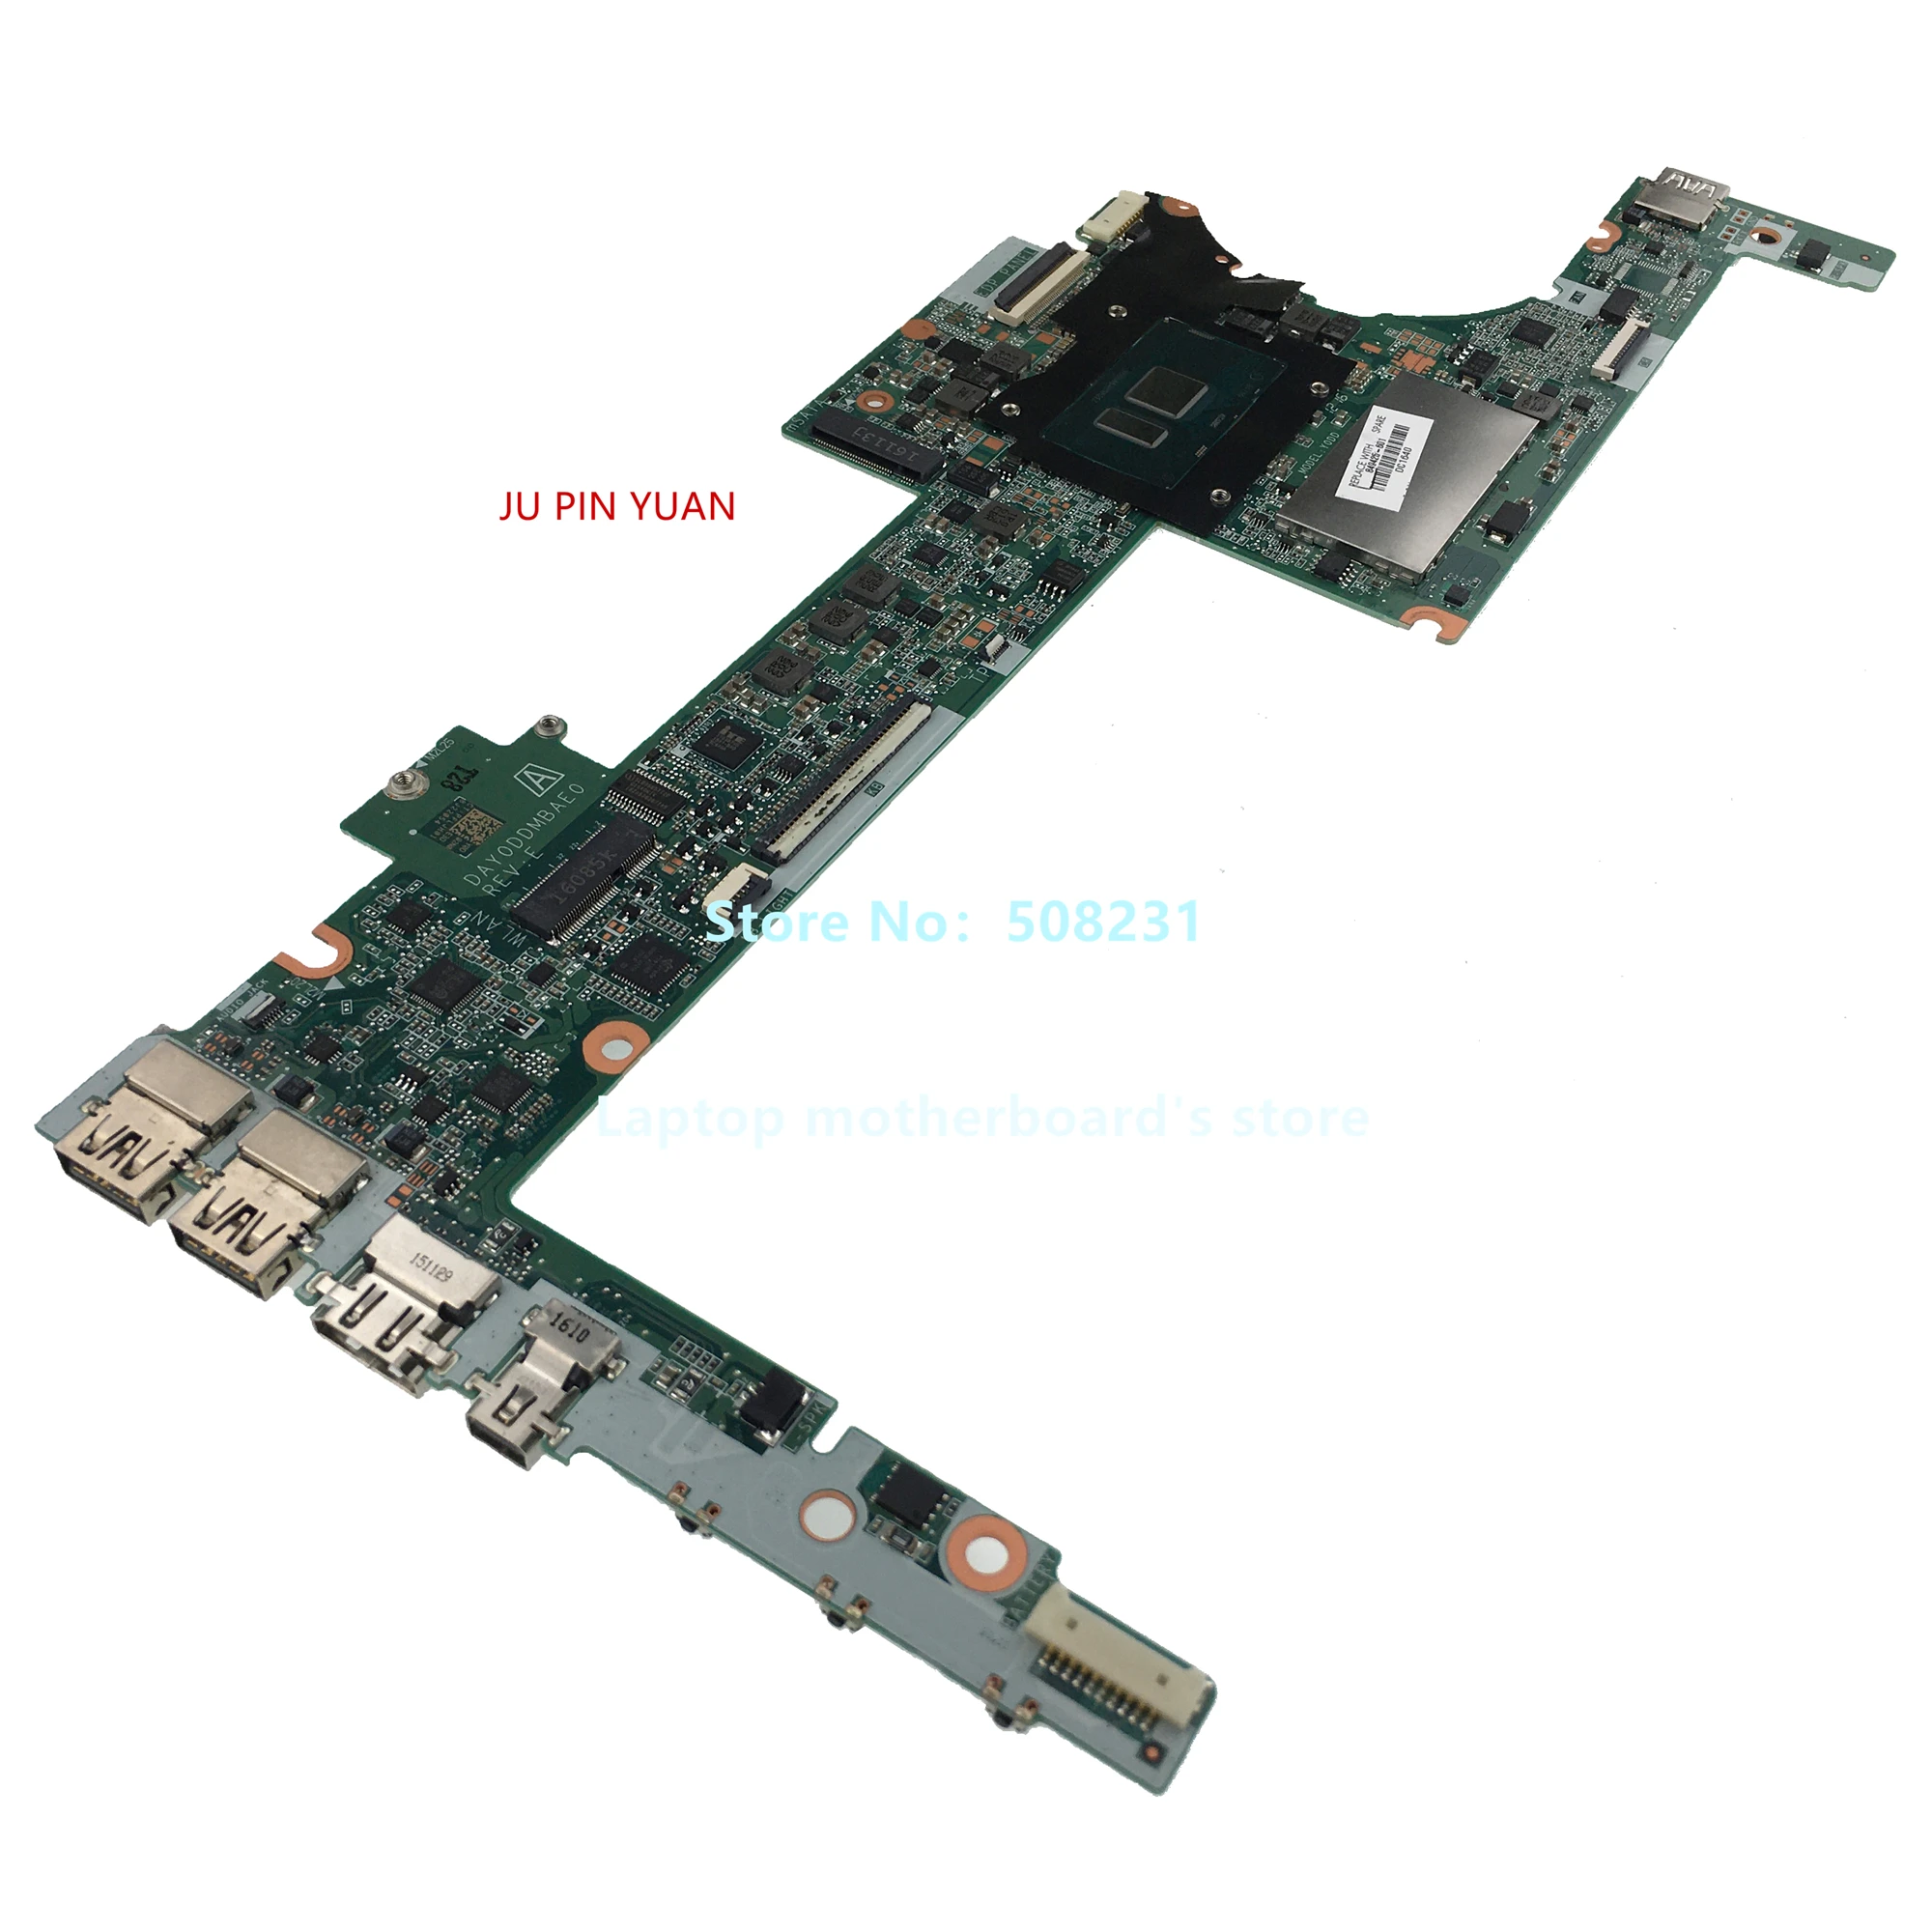 

For HP Spectre Pro X360 G2 13-4000 Laptop Motherboard 849425-601 849425-501 849425-001 DAY0DDMBAE0 With SR2EZ I7-6500U 8GB